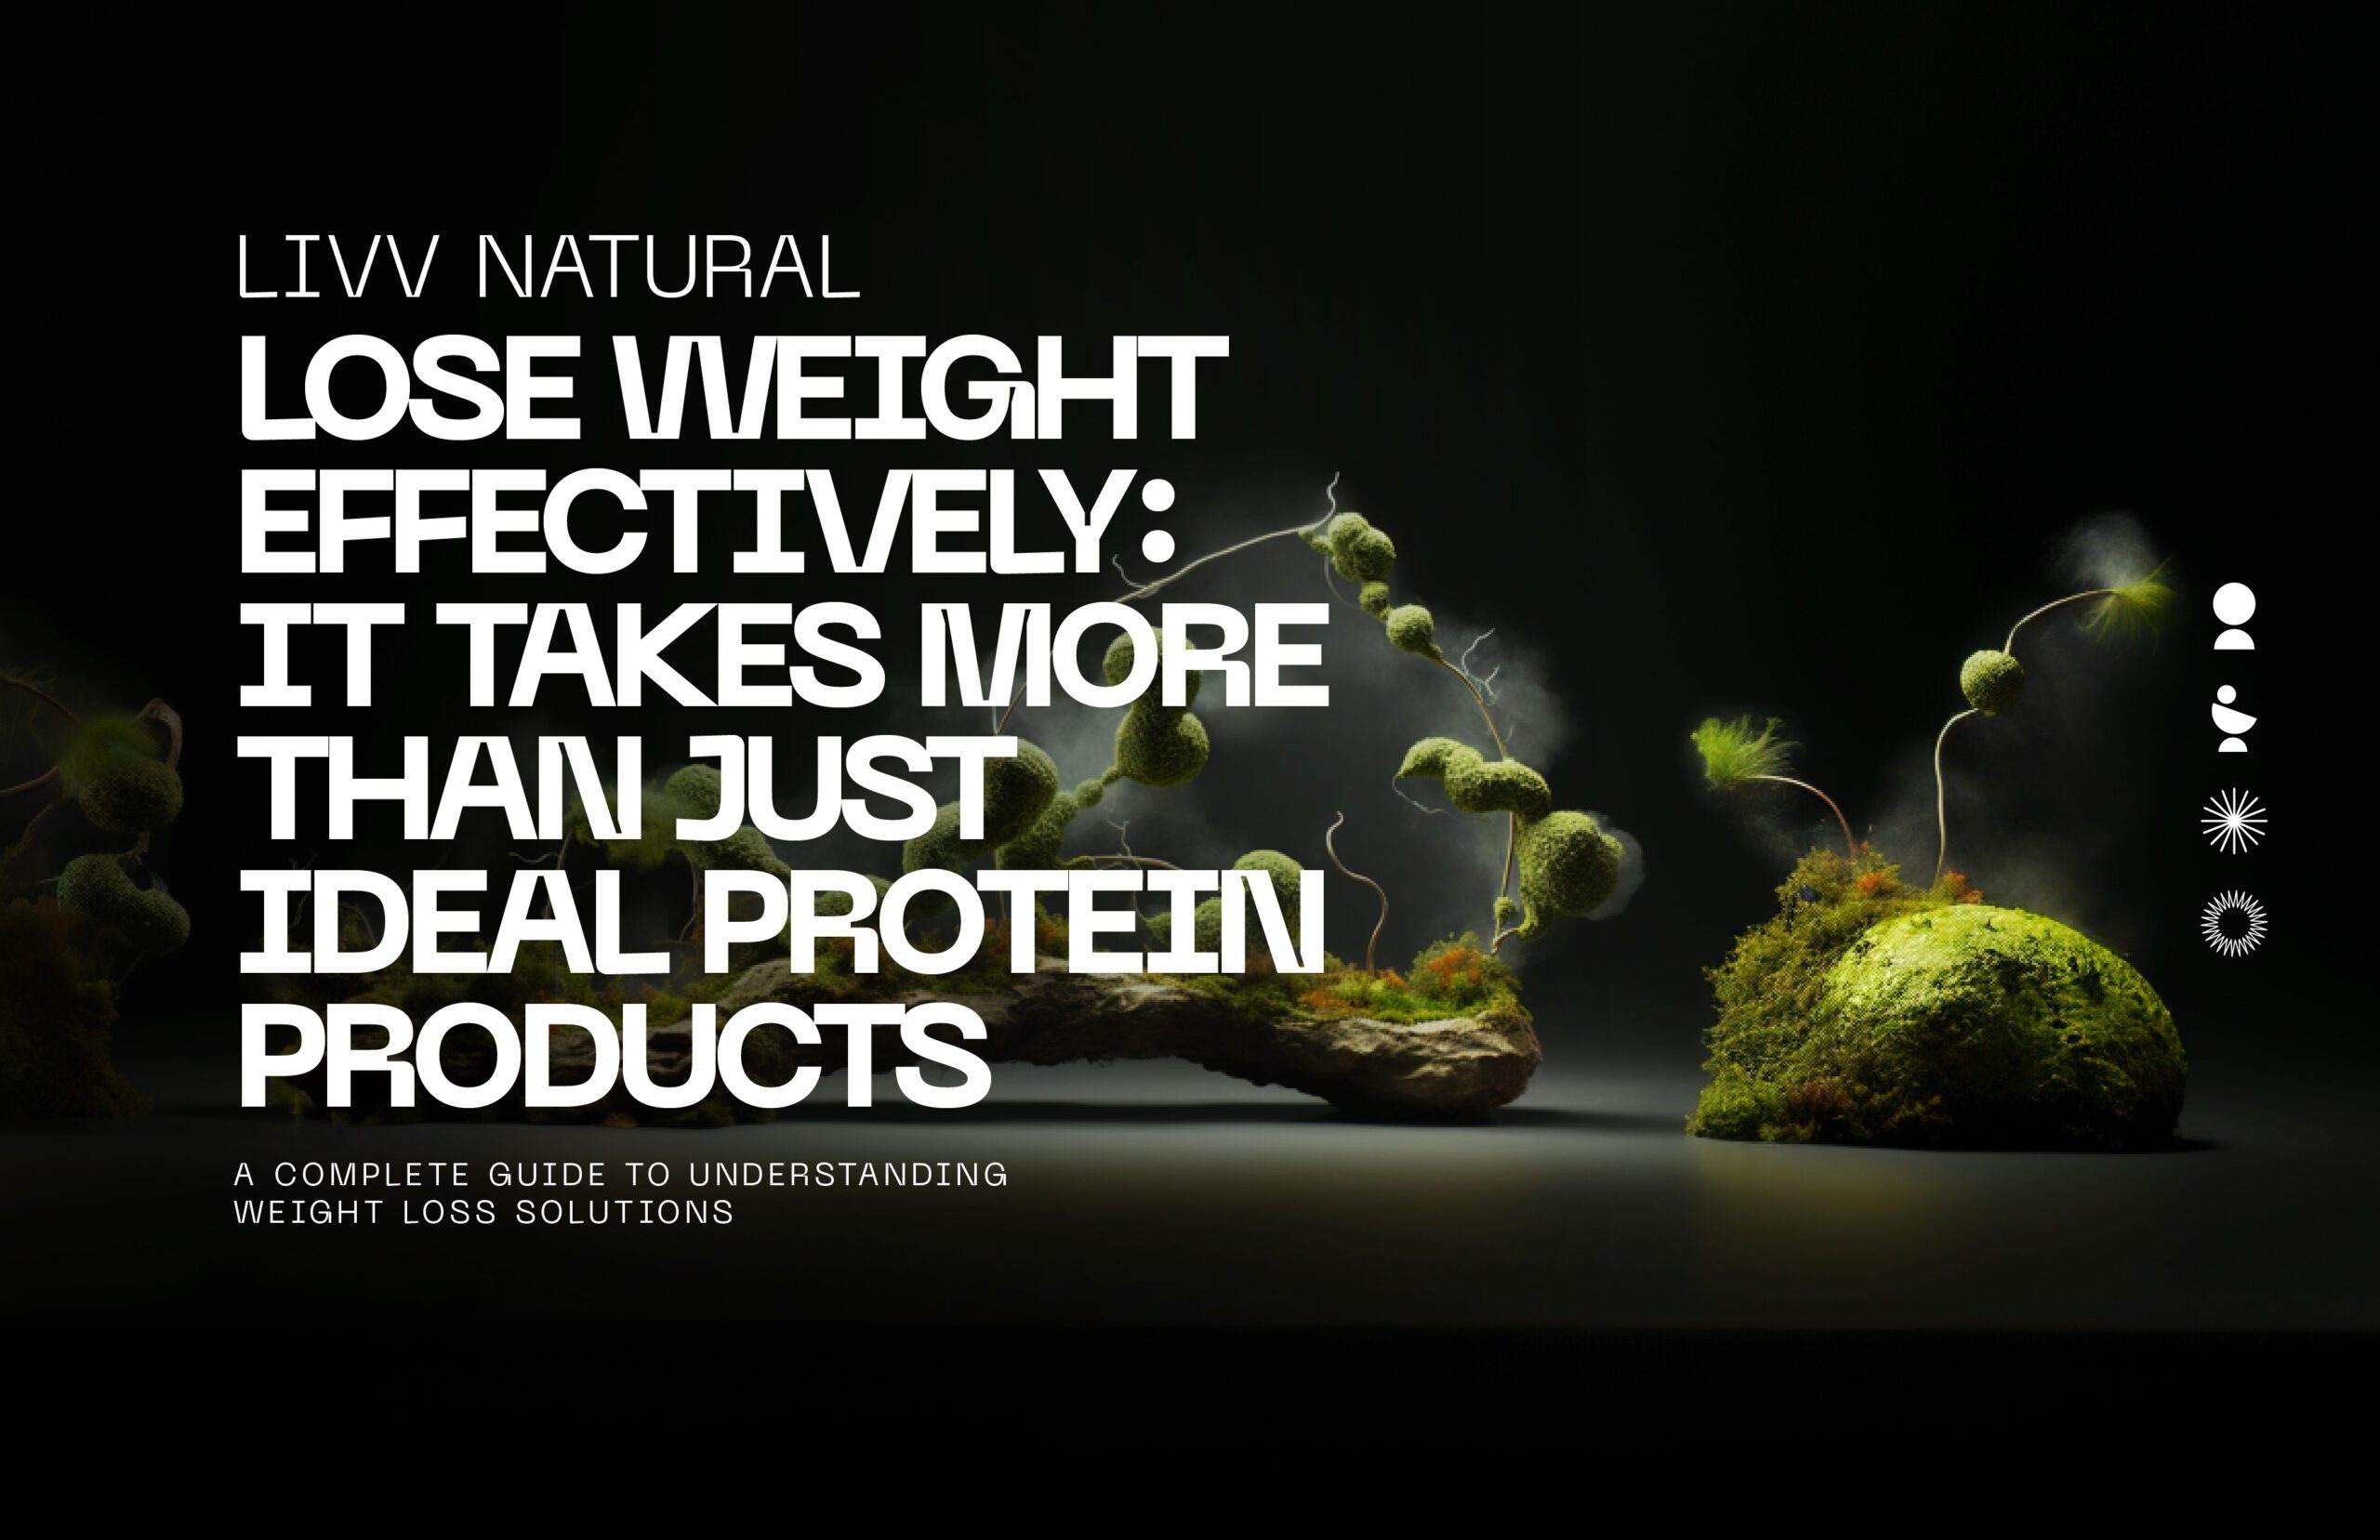 What is the ideal weight loss protocol